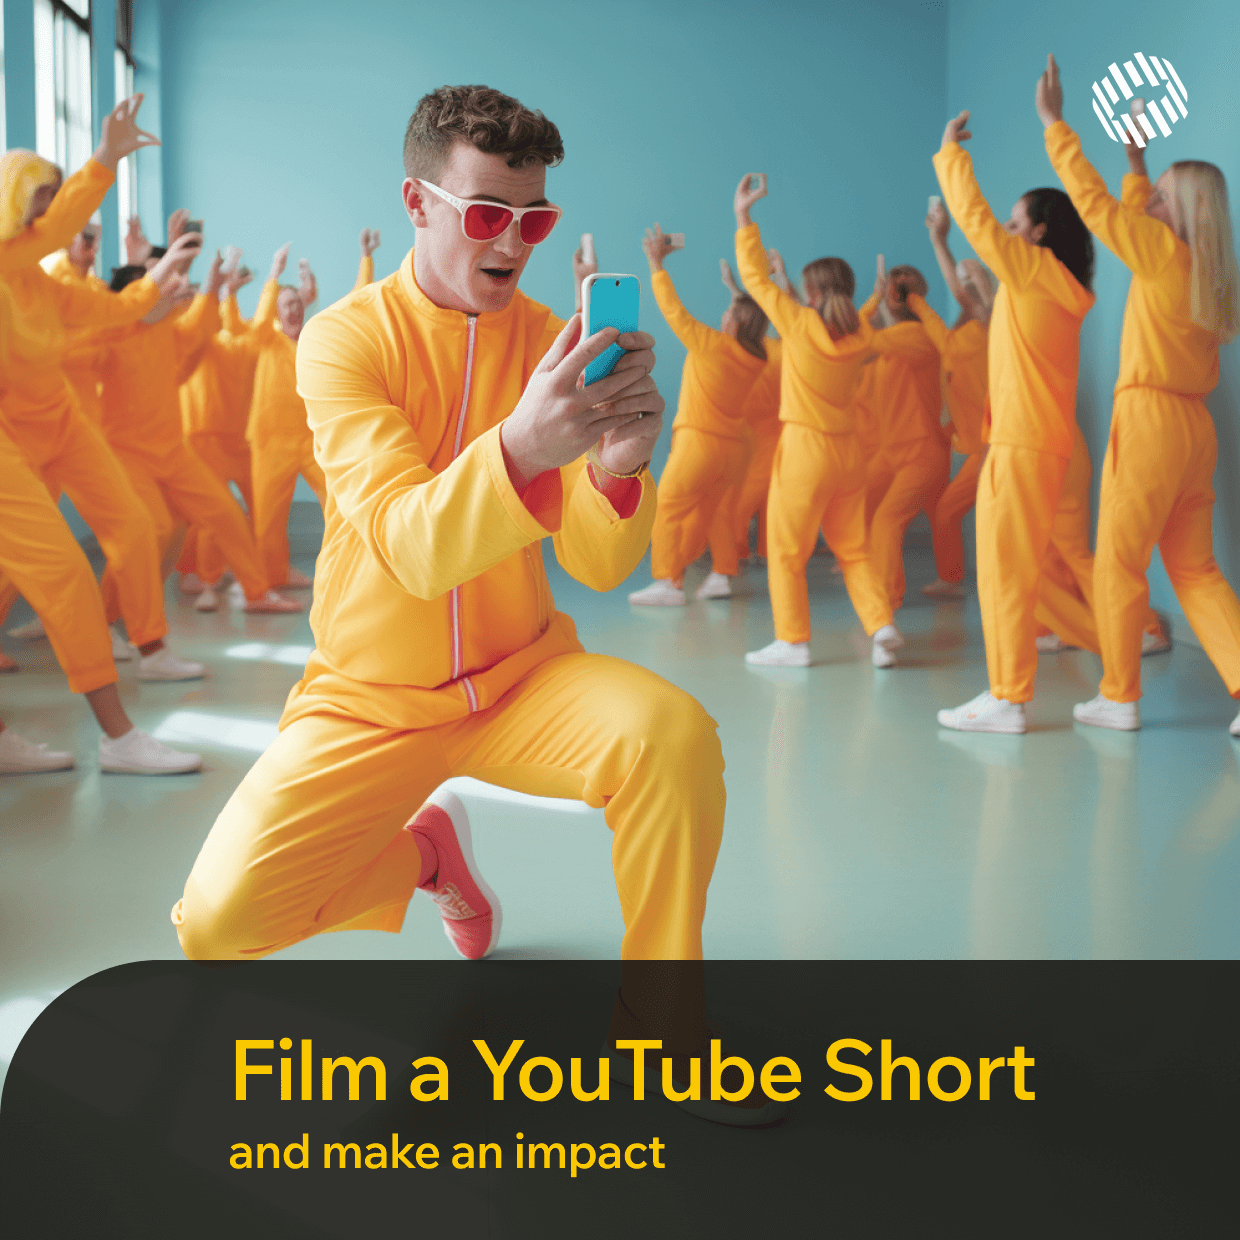 How to film a YouTube Short and make an impact